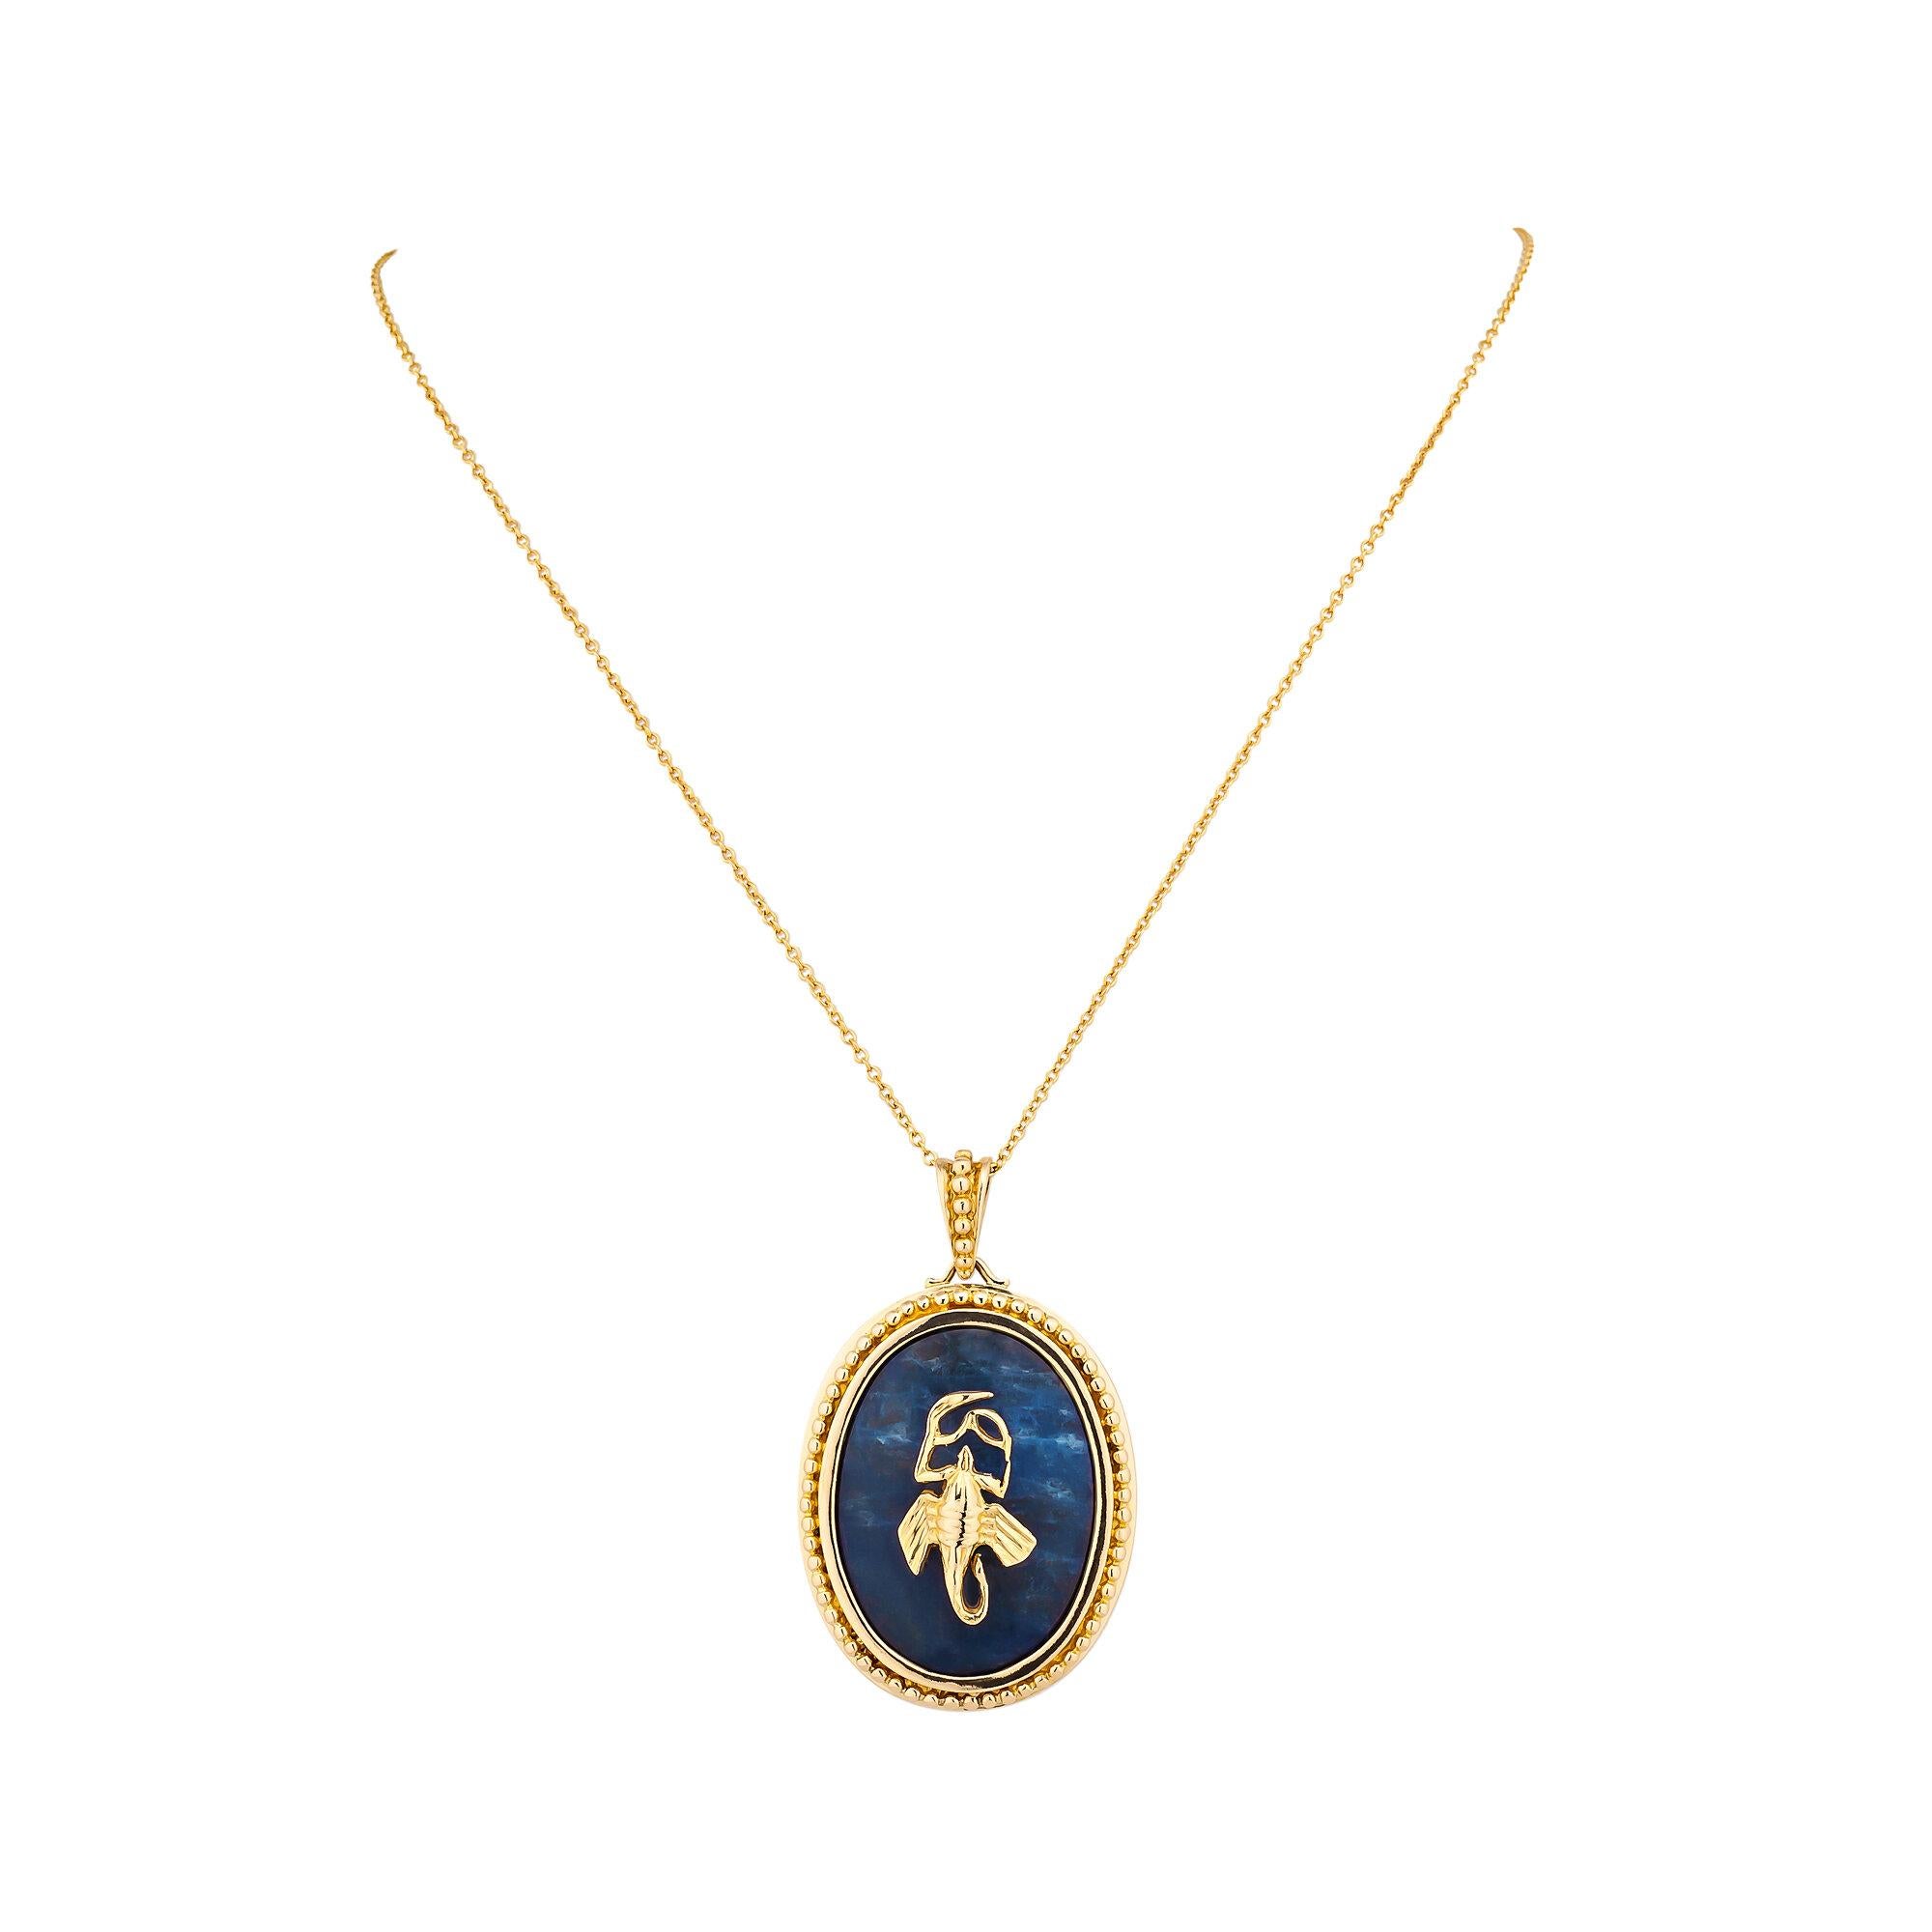 Scorpios are born leaders and live to experience and express emotions, and this vintage Lalaounis scorpio zodiac pendant will lead the way.  Mounted in 18 karat yellow gold, the center scorpion rests on a oval cut carved sodalite background with a